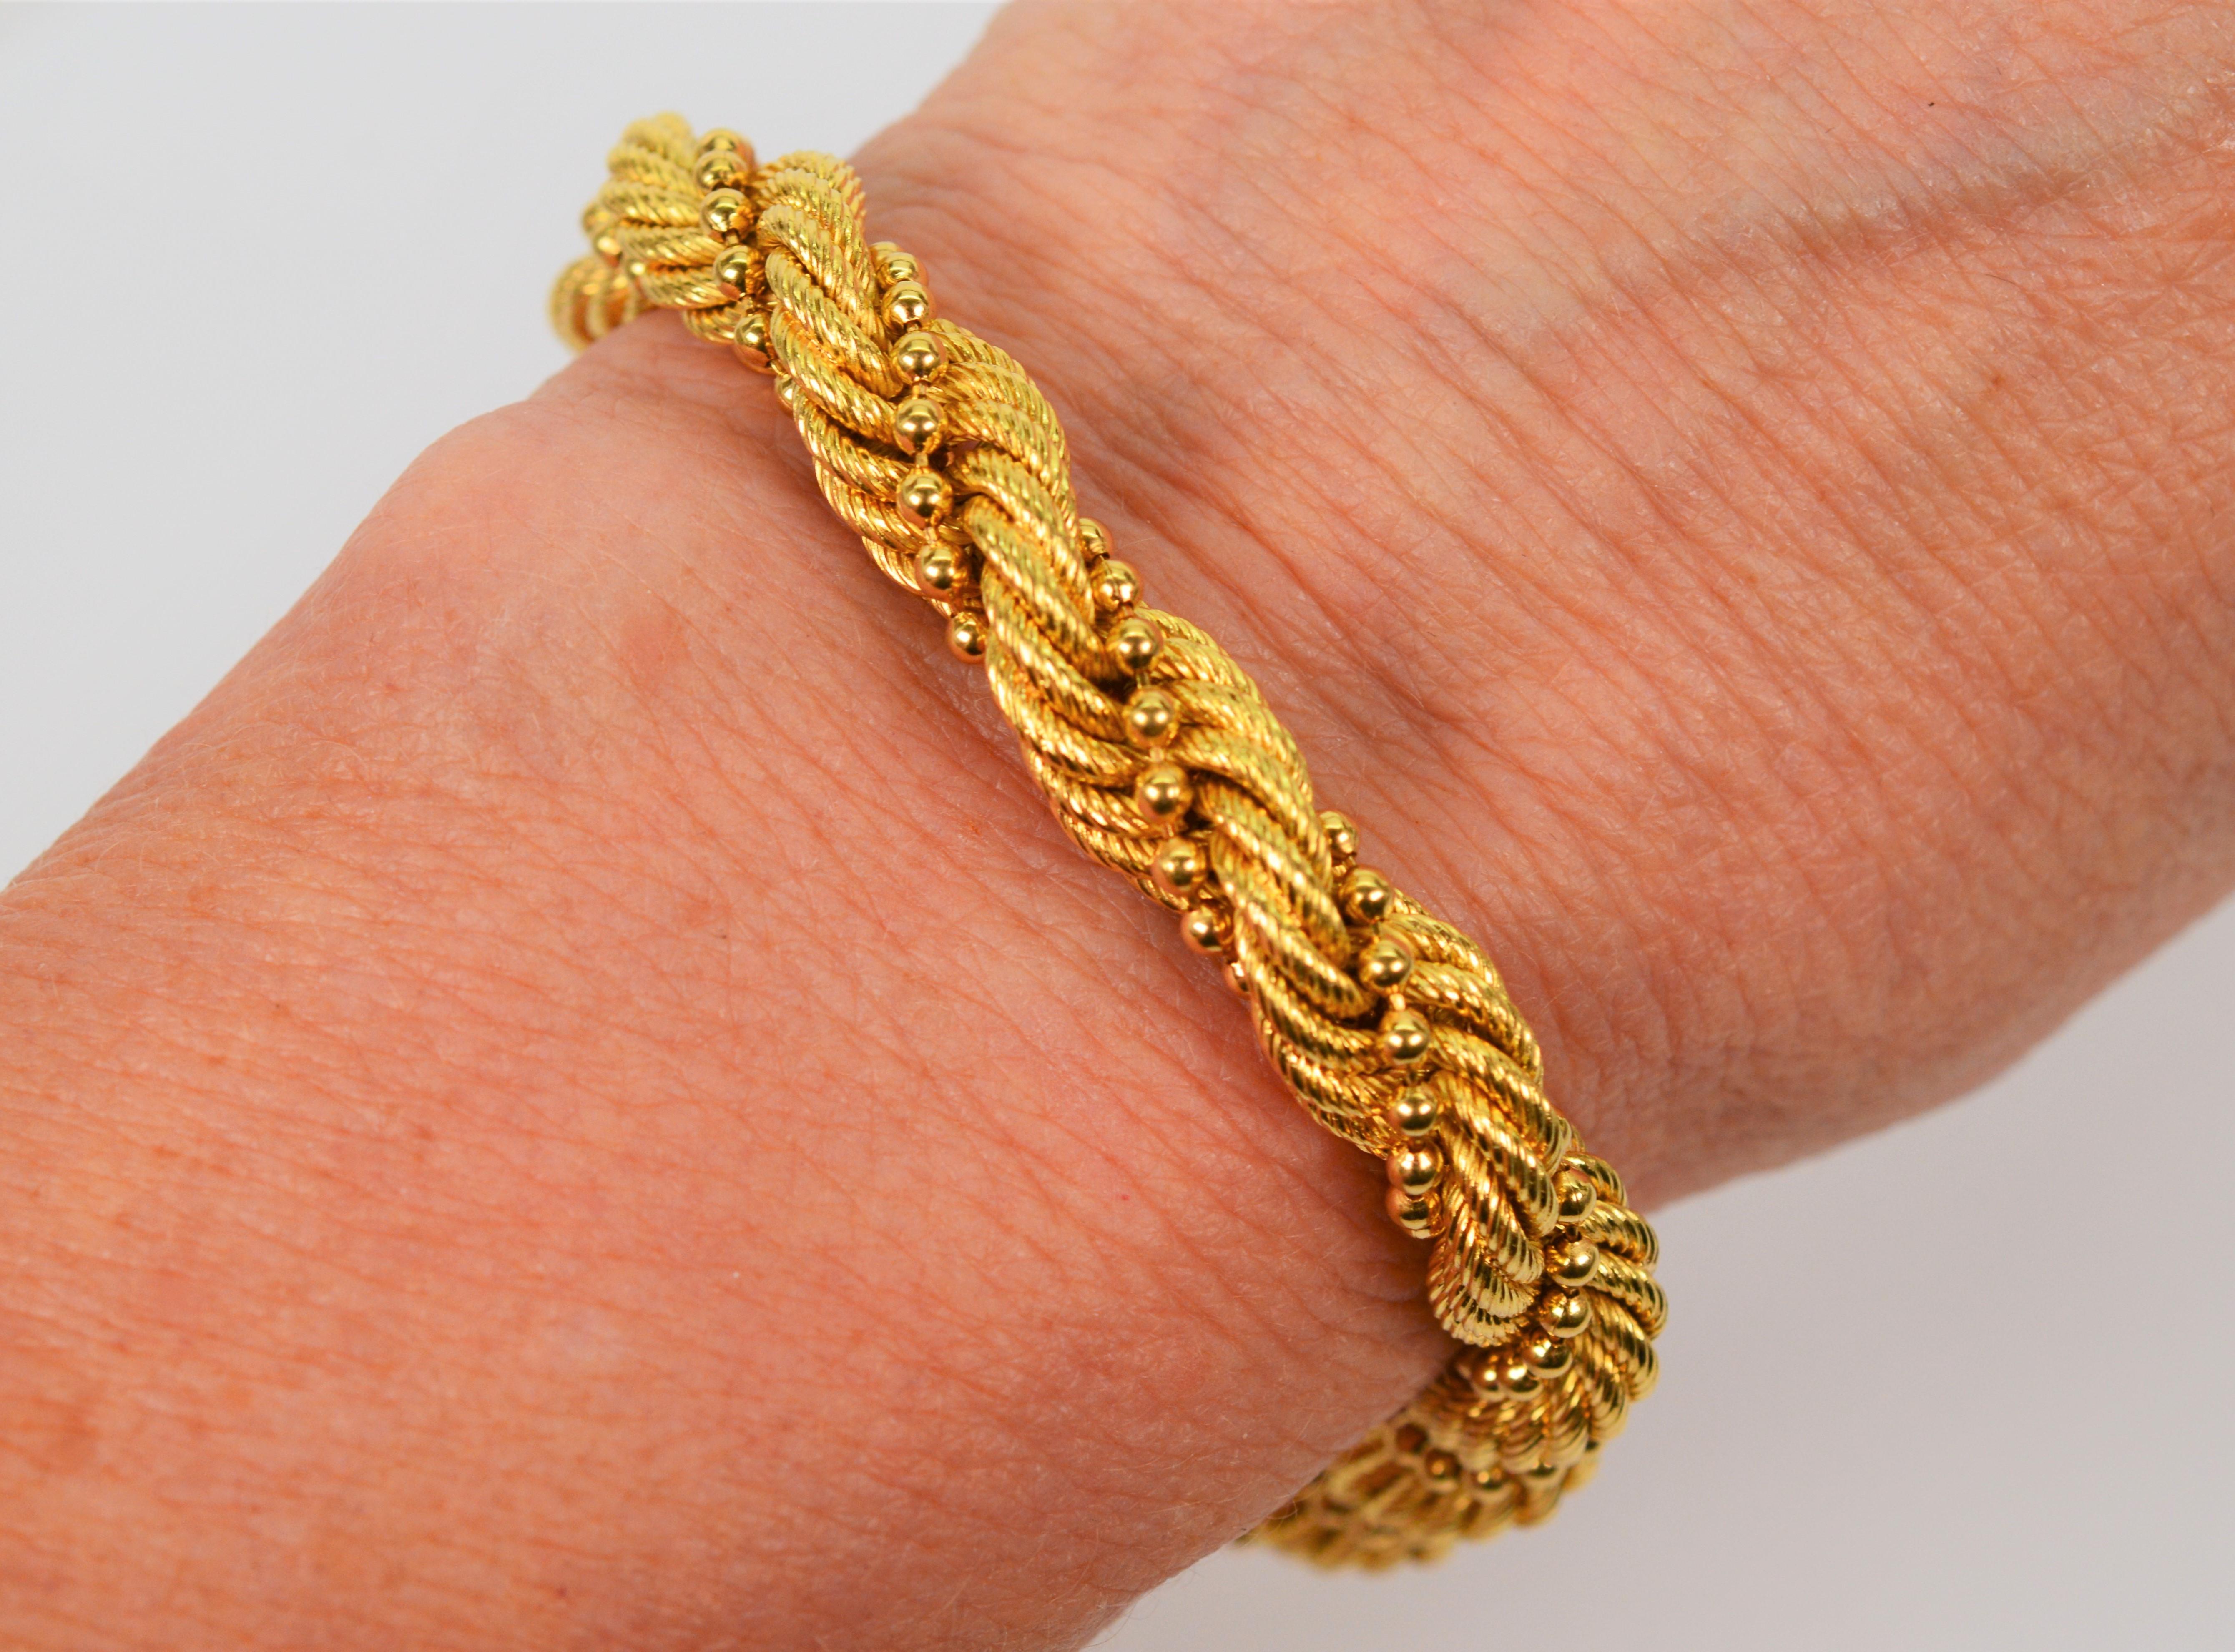 Drape your wrist with bold braided strands of bright 18 karat yellow gold. As a jewelry wardrobe leader, this flexible gold rope bracelet at a generous 7.3mm is intertwined with a single strand of petite gold beading which adds elegance to the